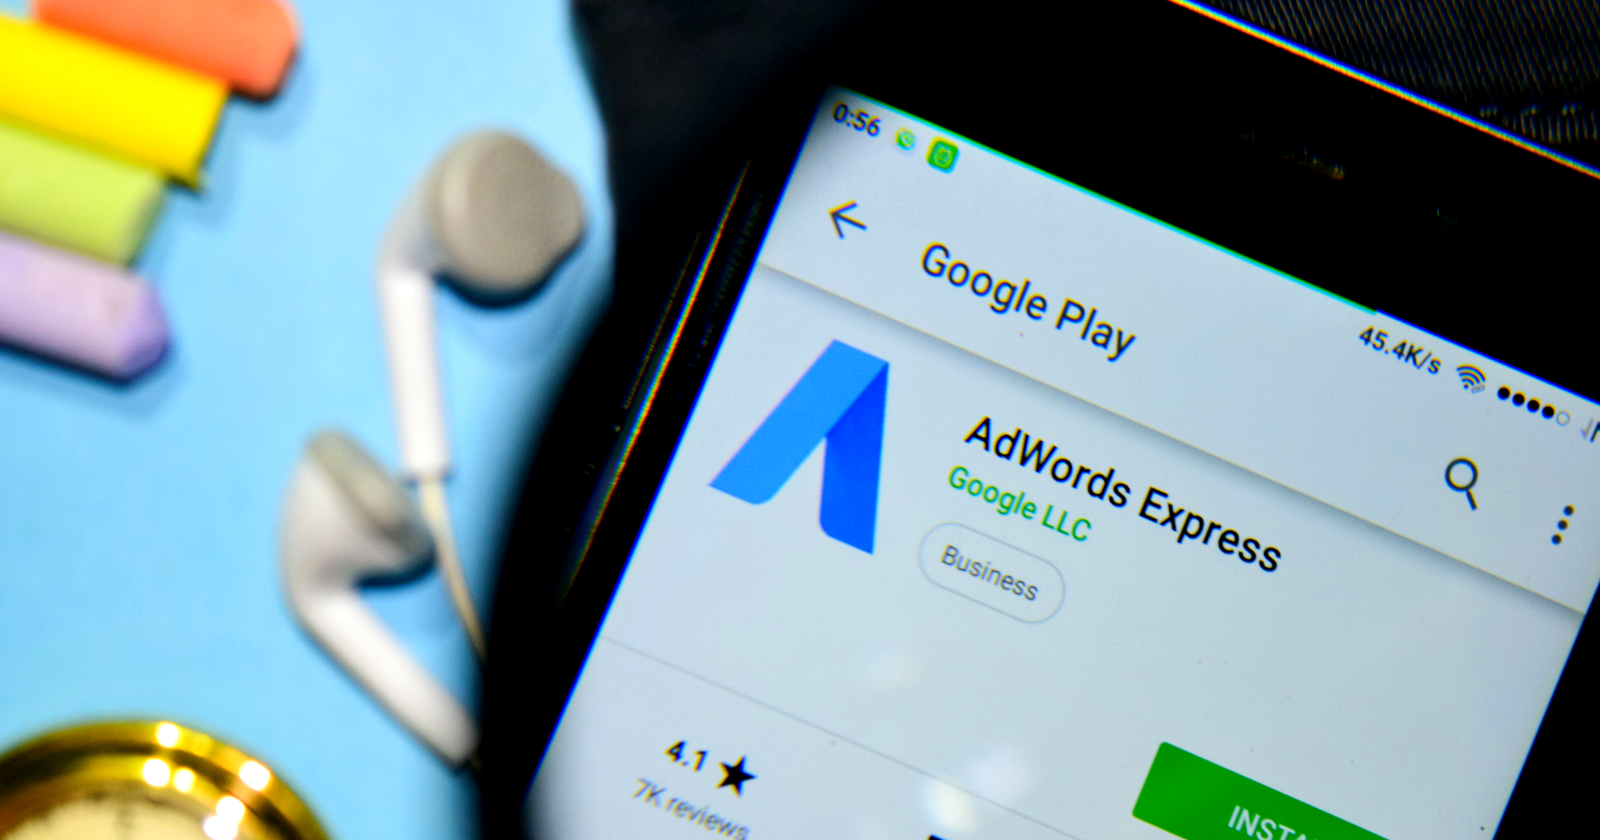 Google AdWords Express is Now Part of Google Ads